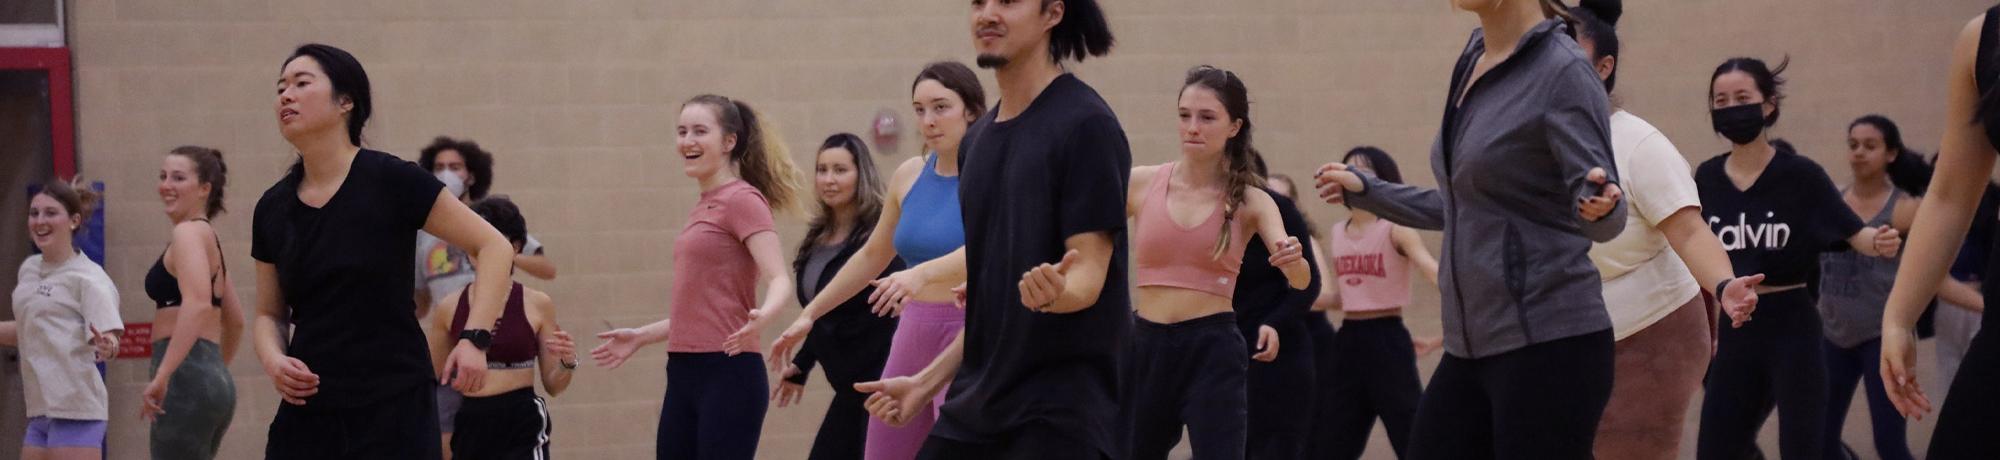 A large group of students does Zumba in an indoor gym